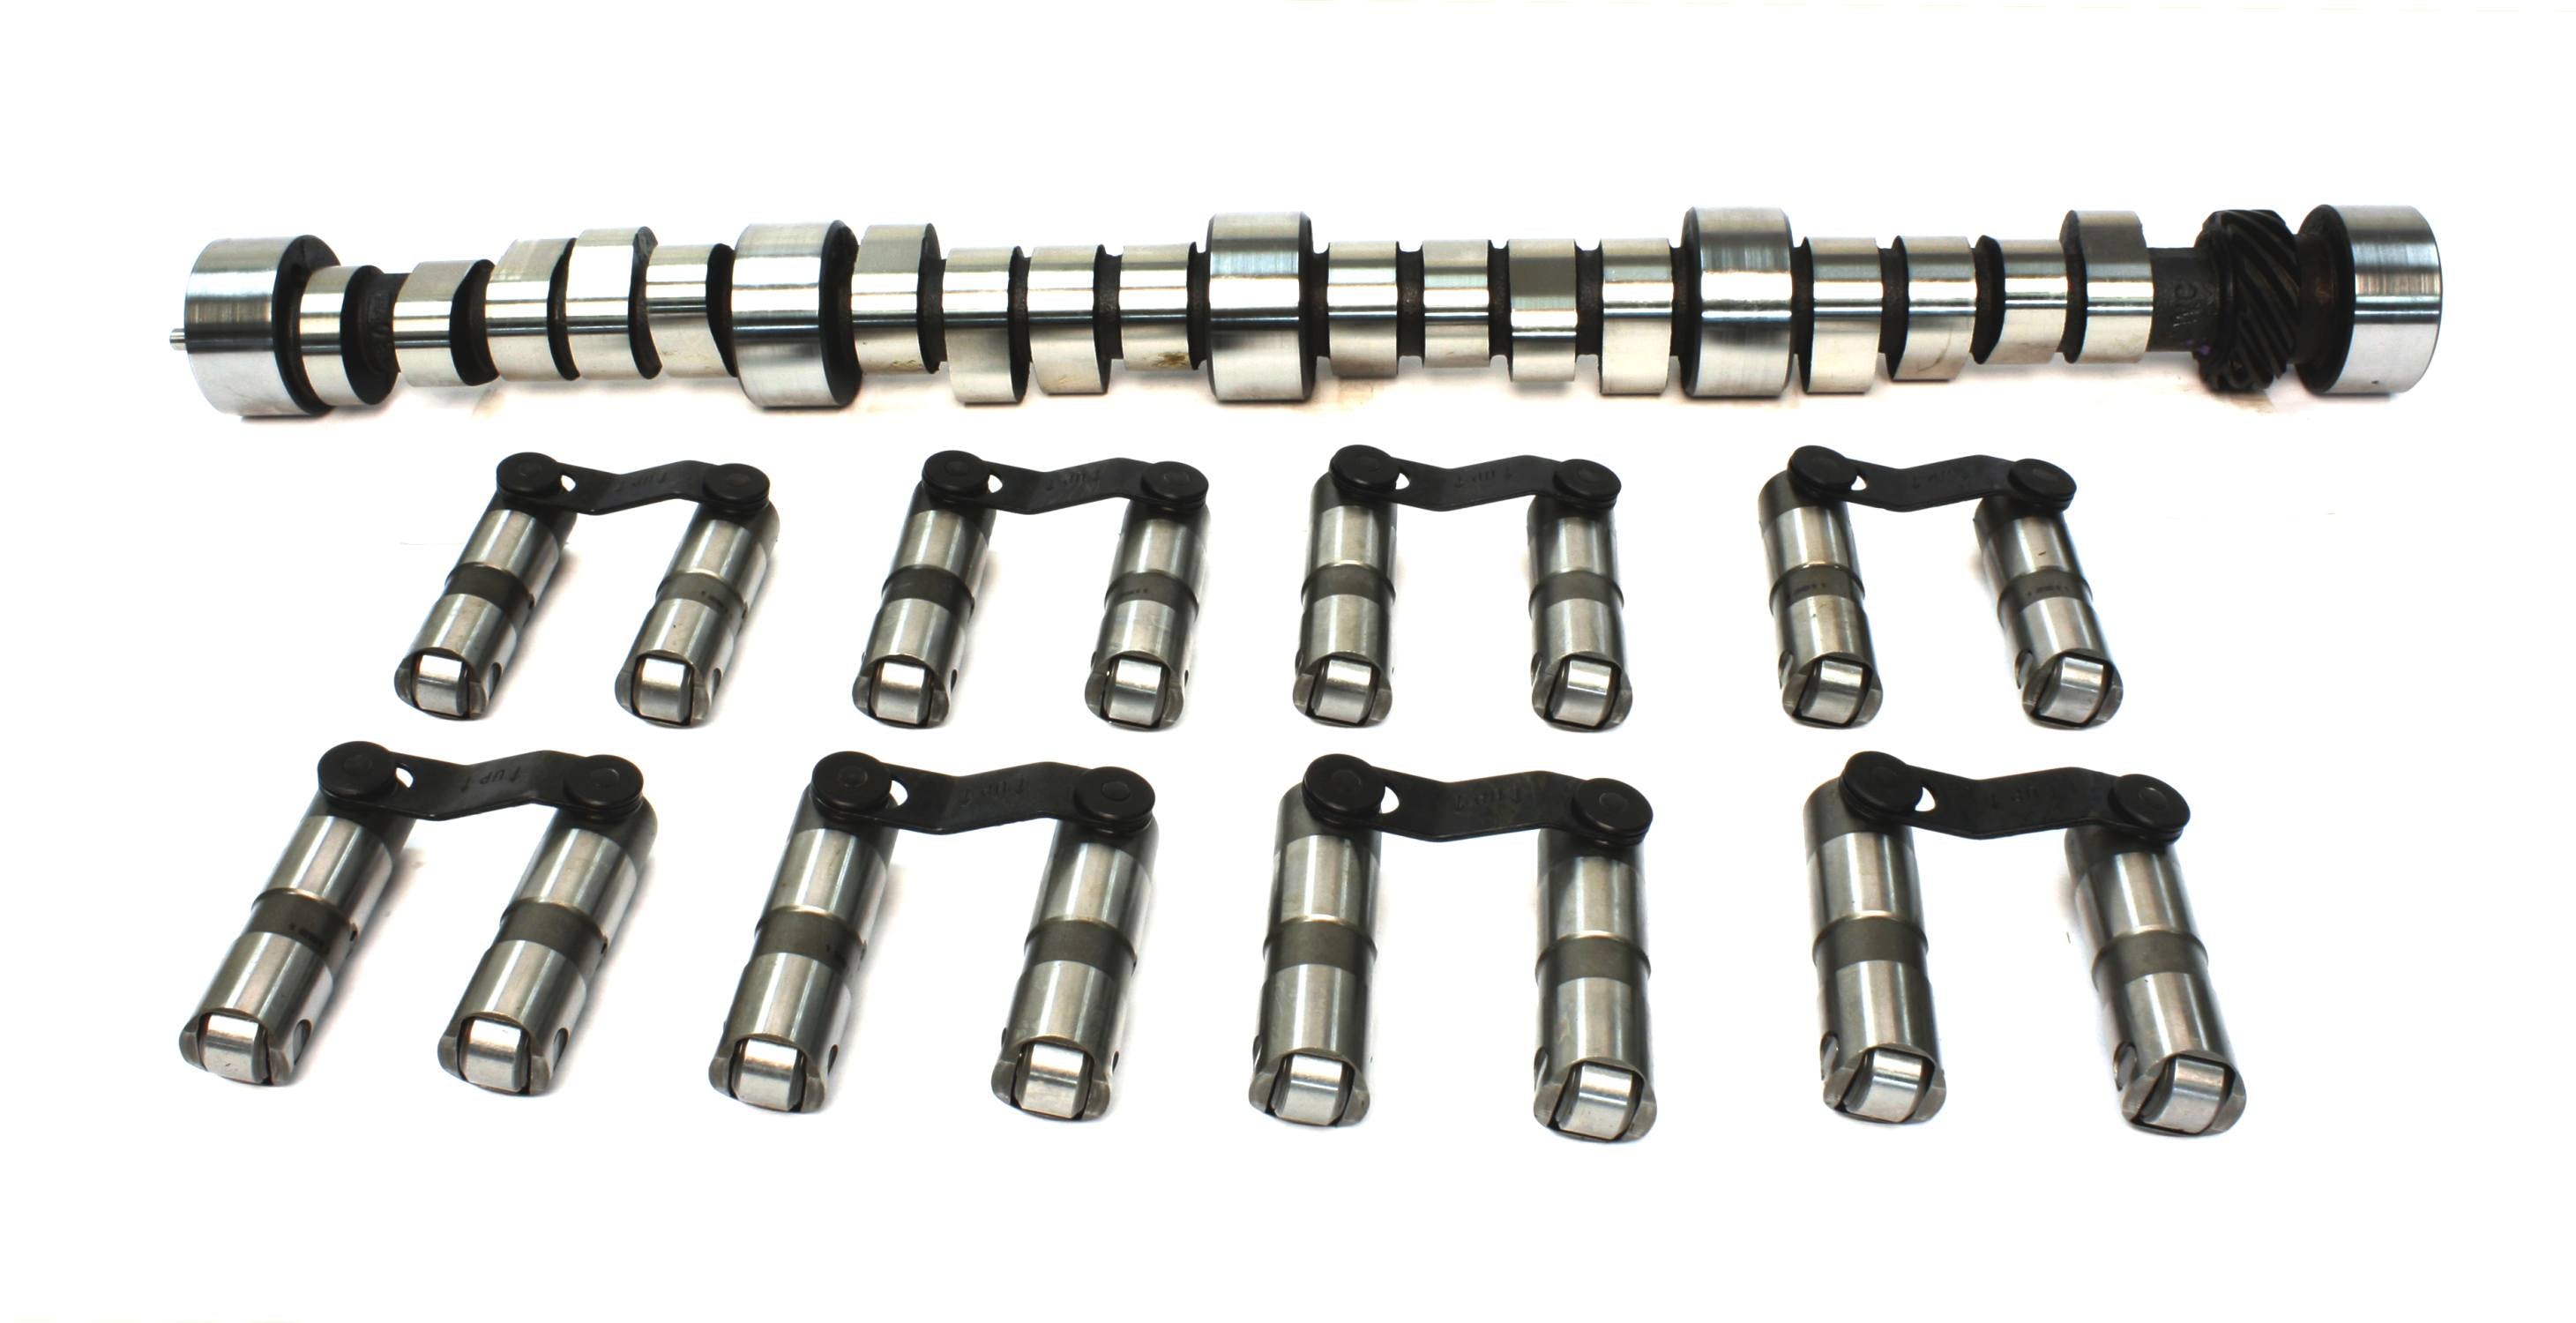 Competition Cams CL11-409-8 NITROUS HP 224/236 HYDRAULIC ROLLER CAM/LIFTER KIT CHEVROLET BIG BLOCK 396-454